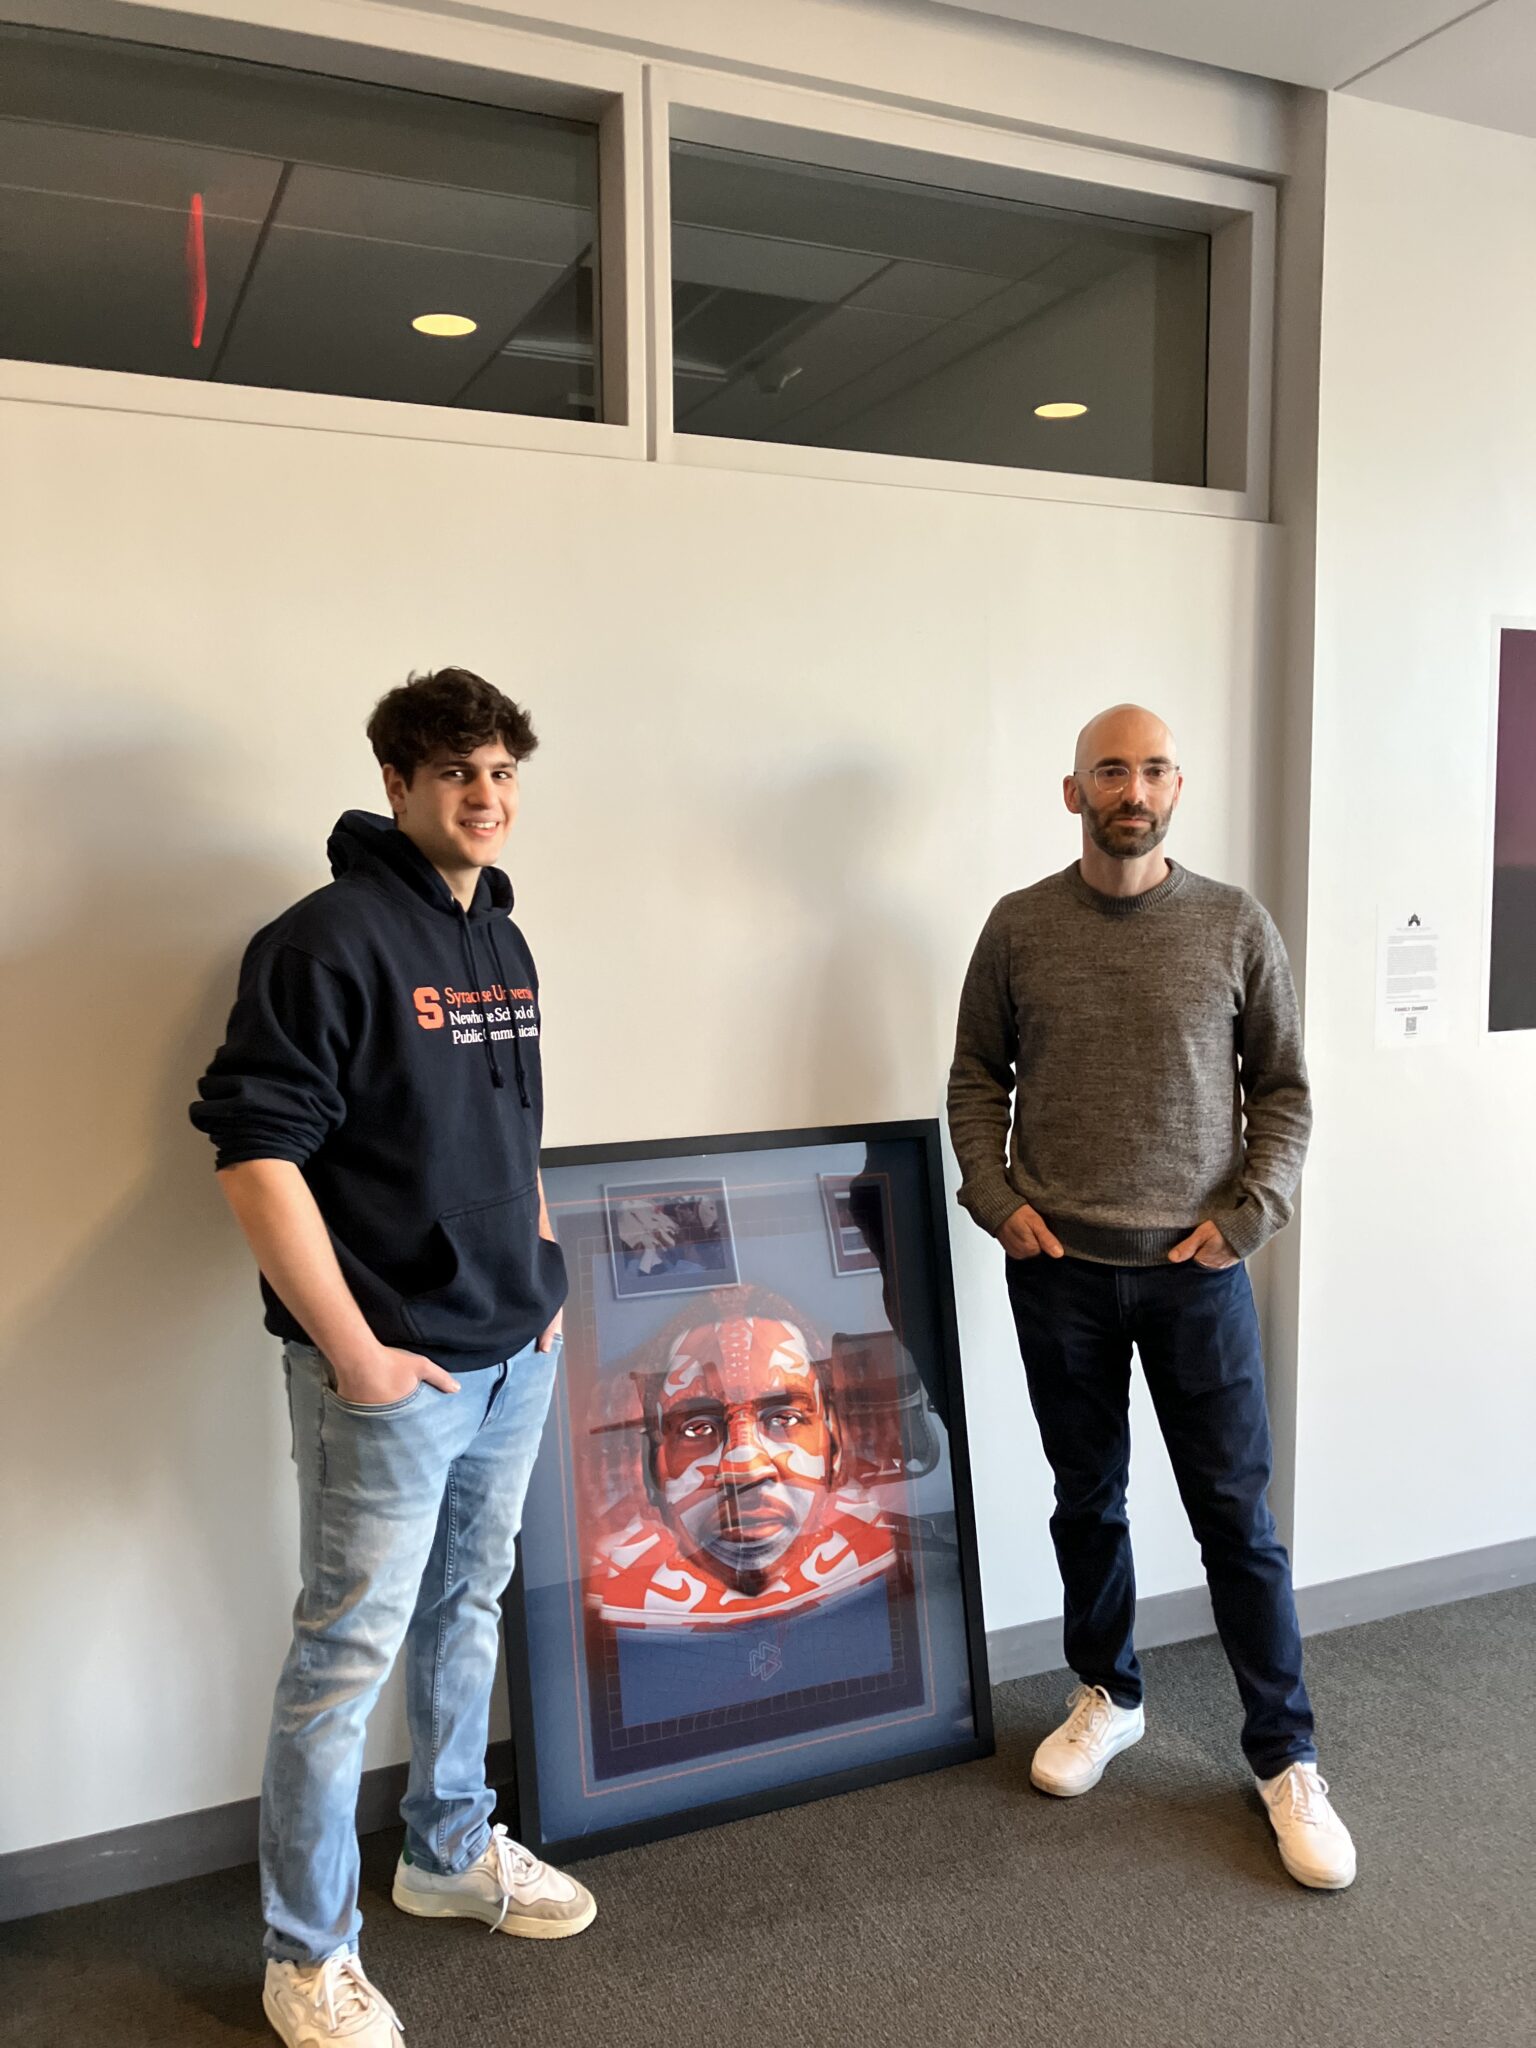 Two people stand together with a framed photograph between them